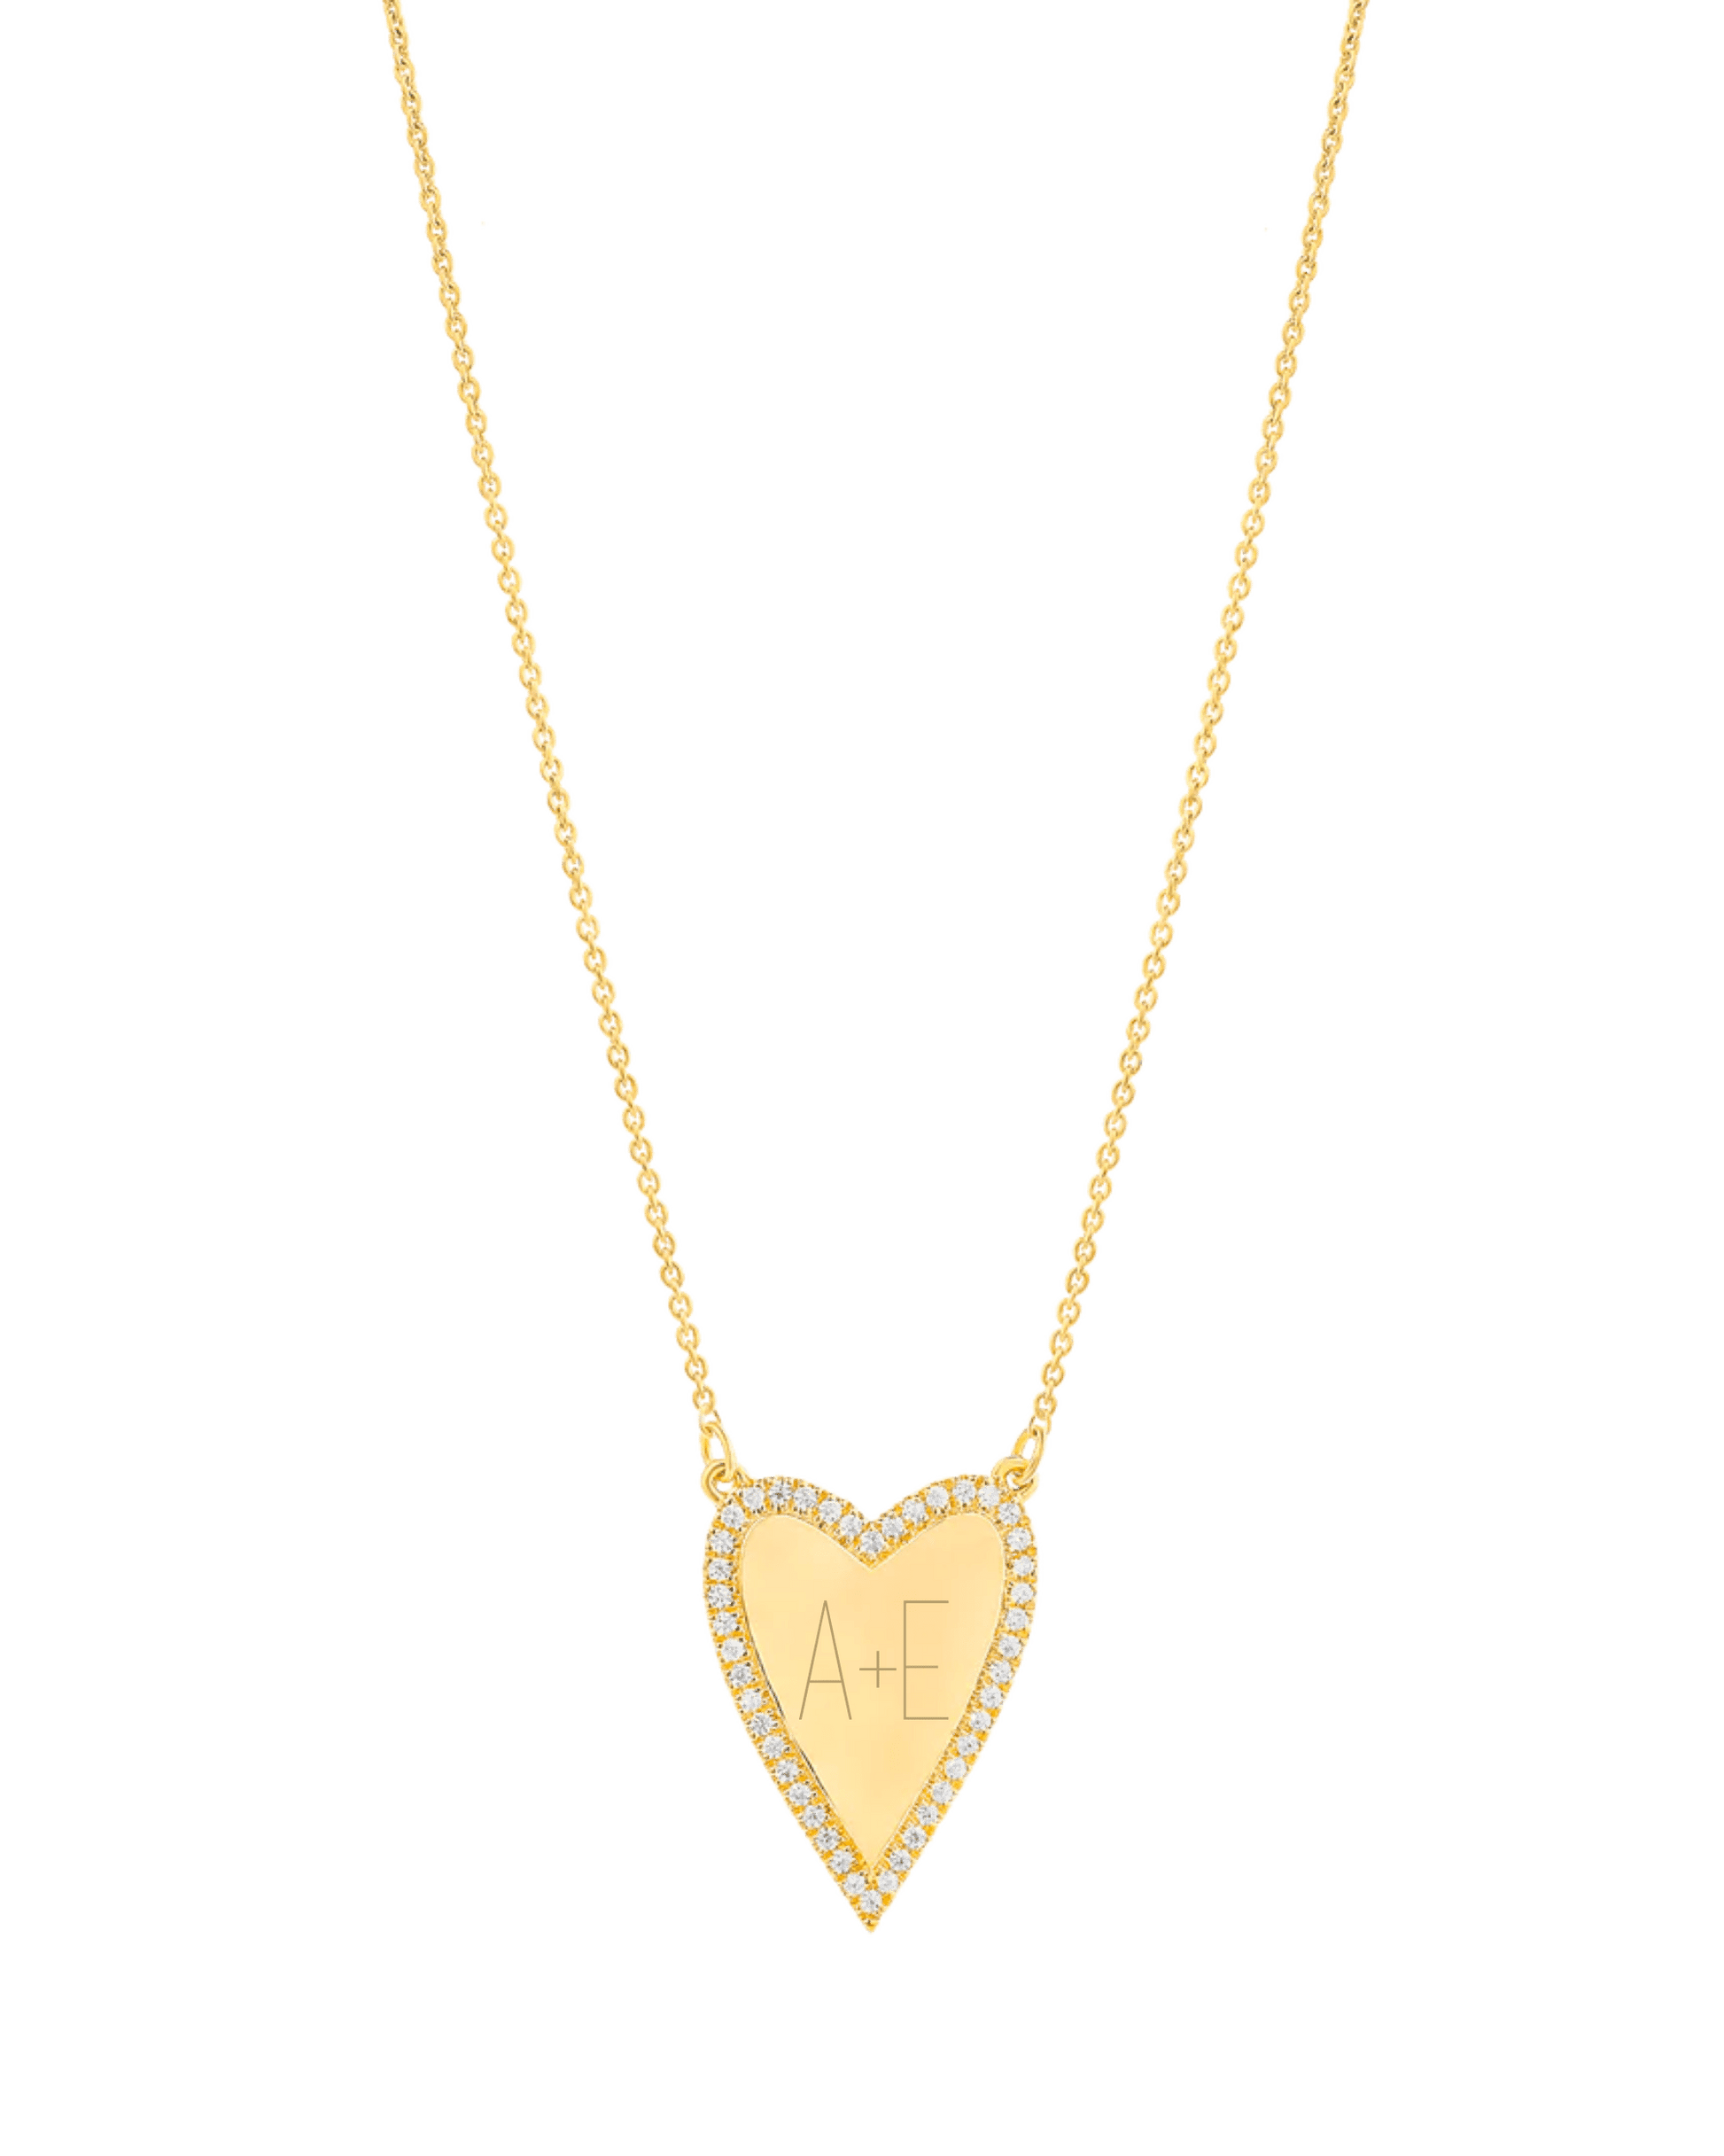 Engravable Outlined Heart Diamond Necklace - 925 Sterling Silver Necklaces magal-dev 